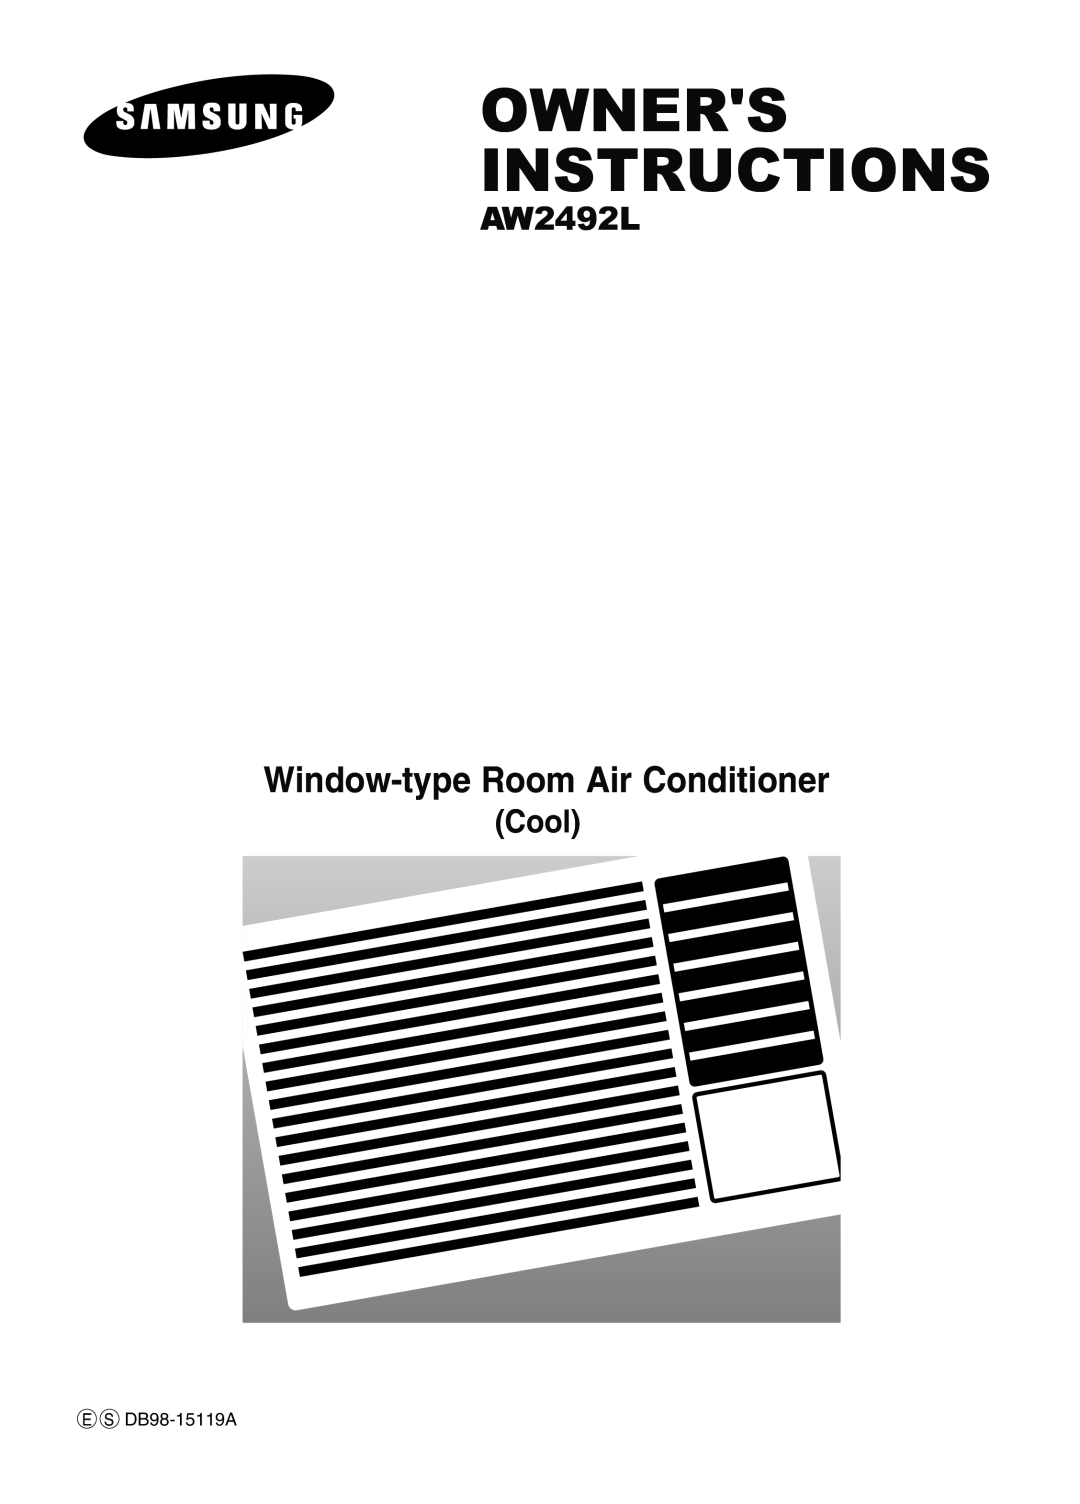 Samsung AW2492L manual Window-typeRoom Air Conditioner, Owners Instructions, Cool 